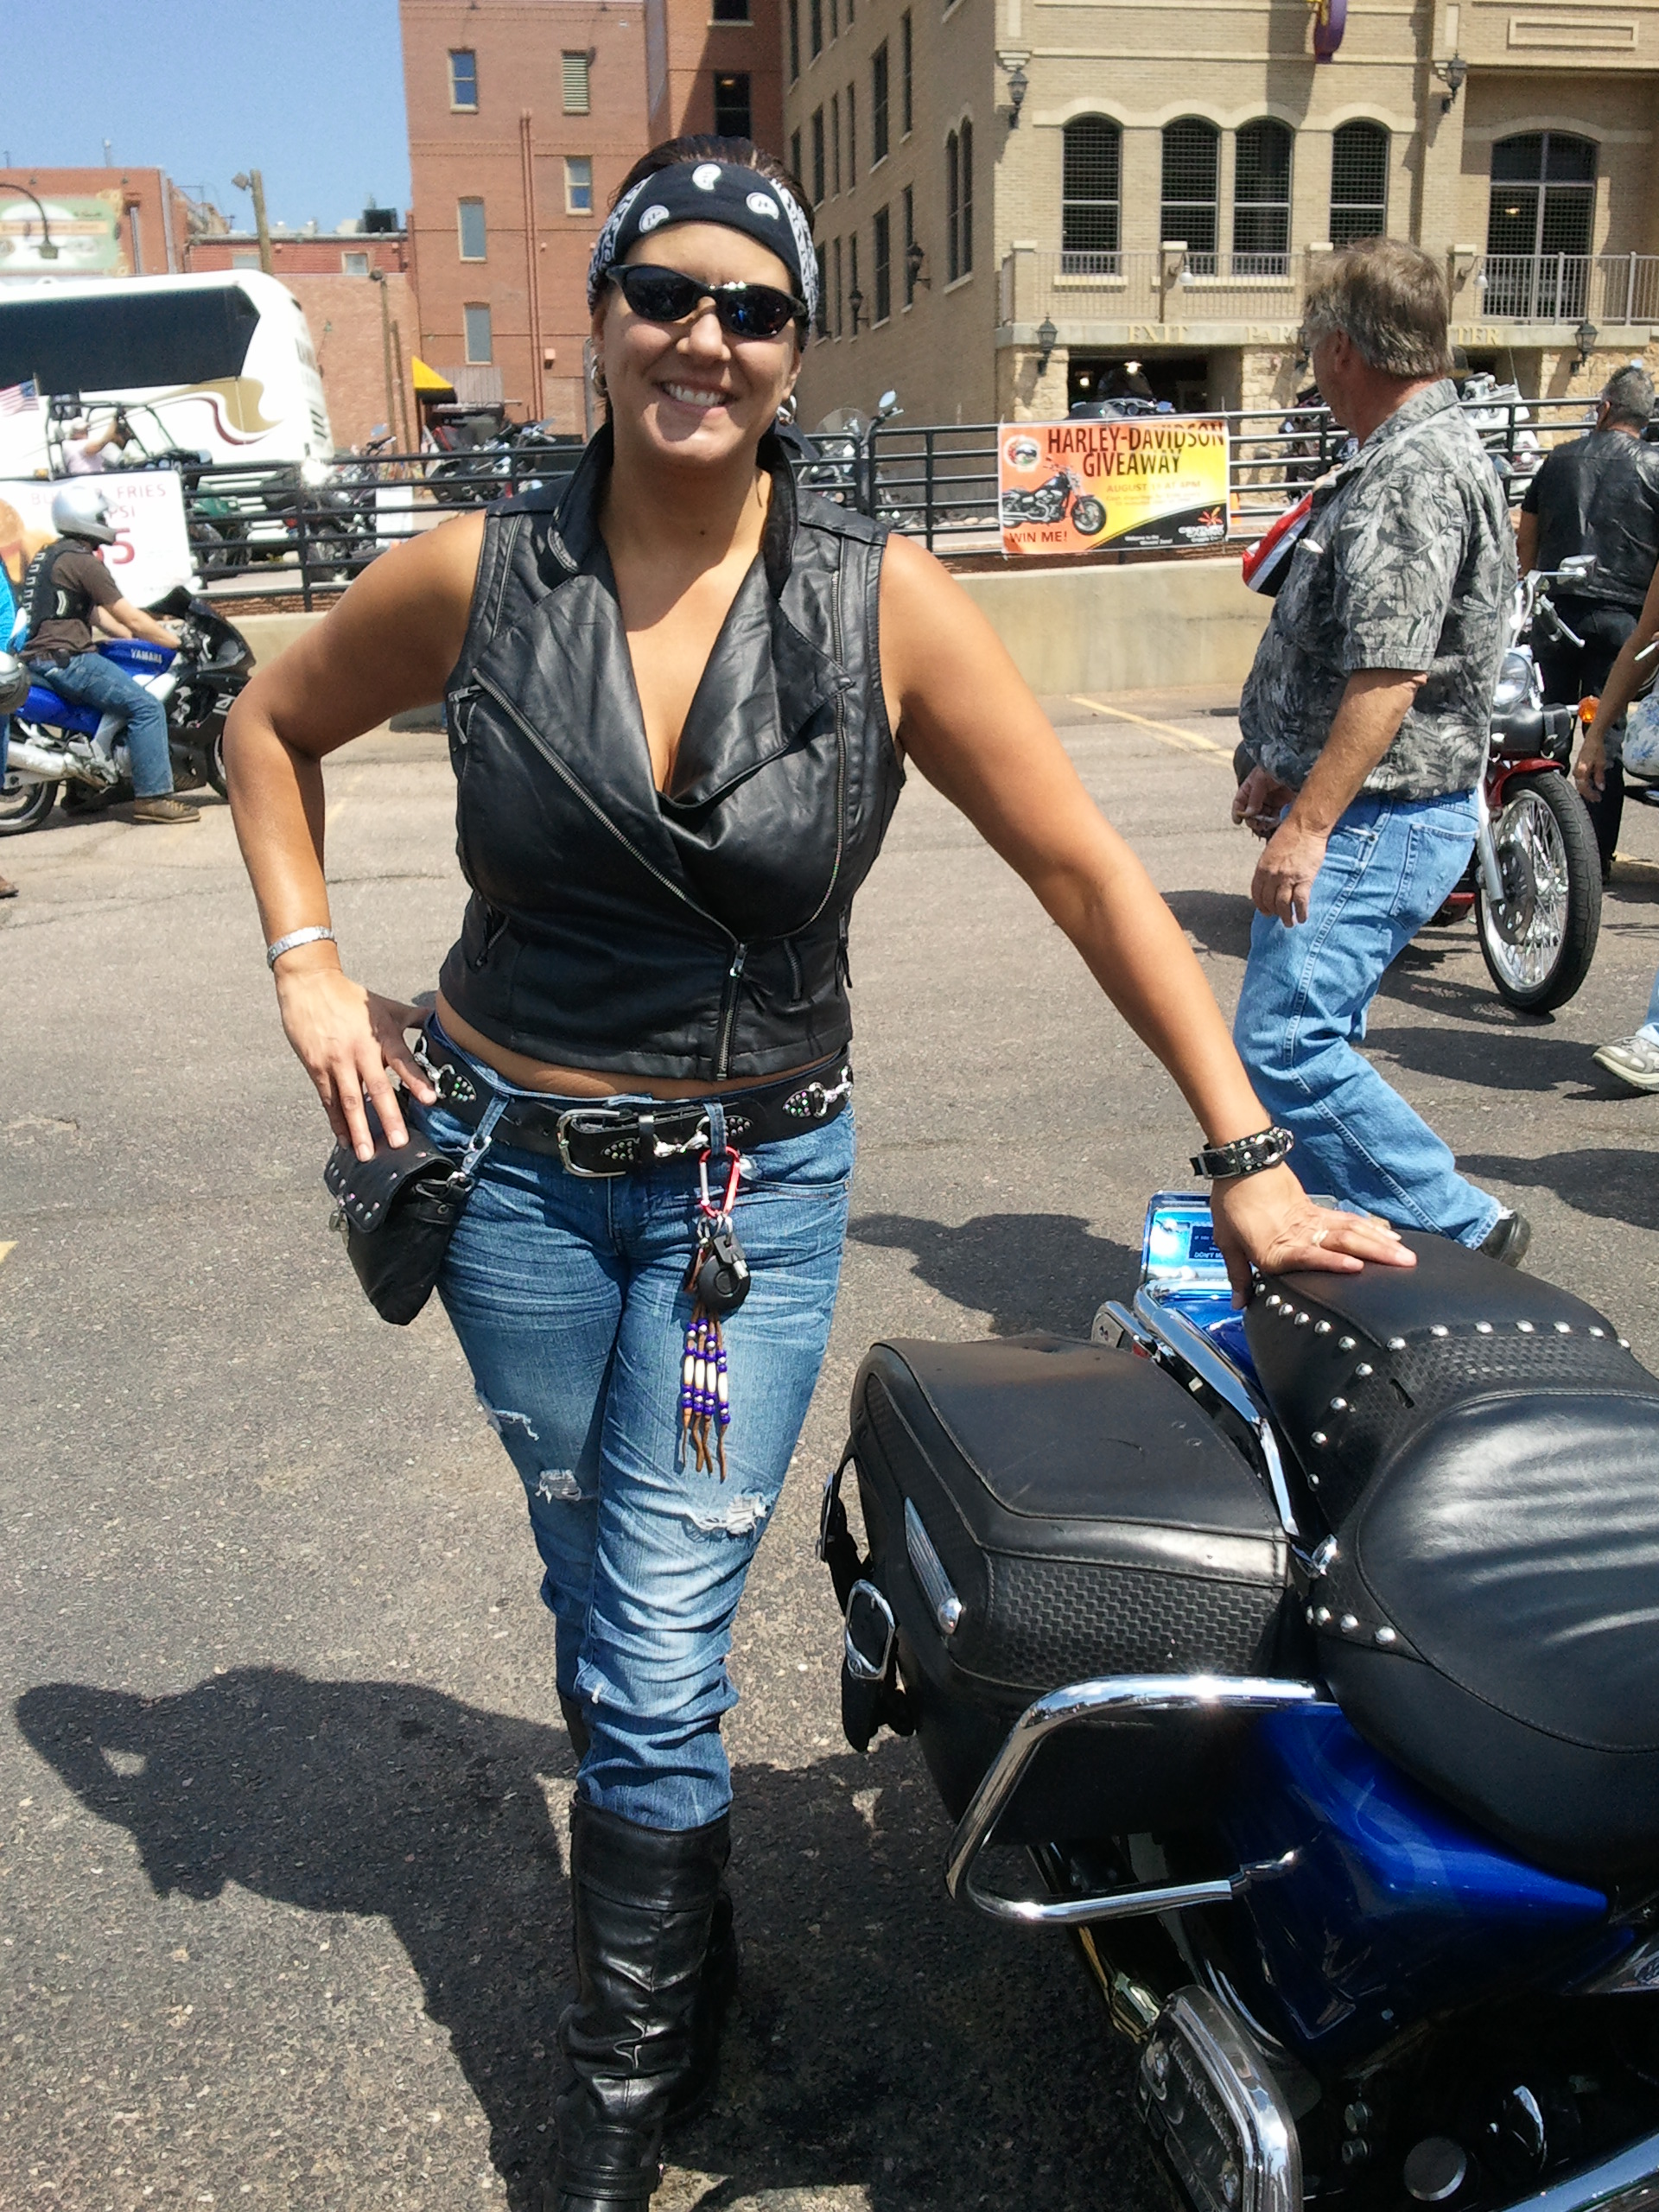 Download this Biker Chick Heather picture